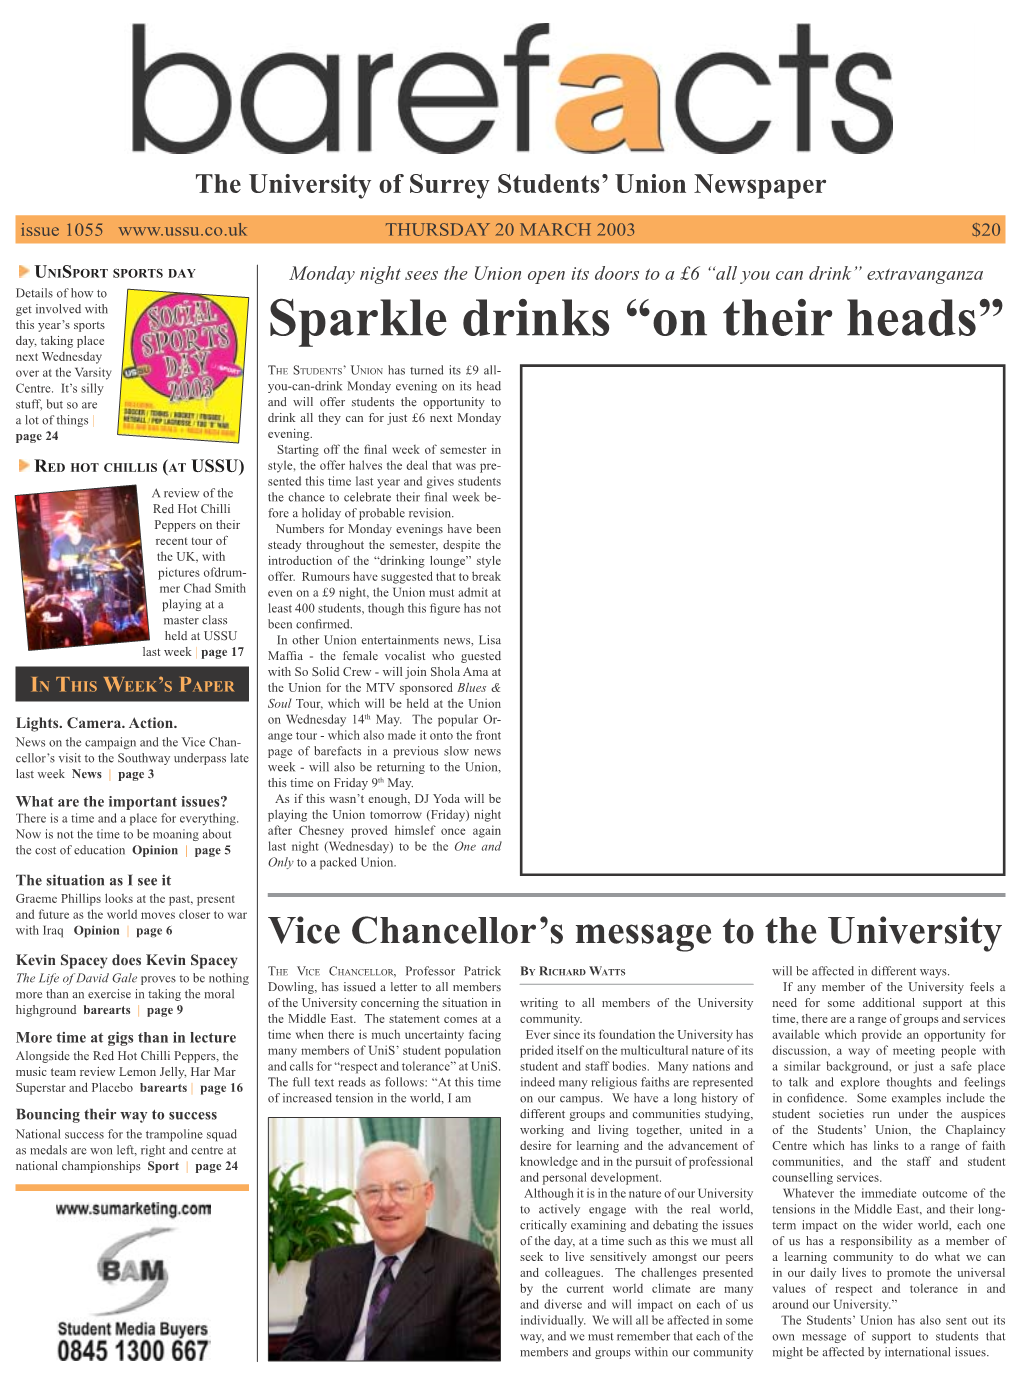 Sparkle Drinks “On Their Heads” Next Wednesday Over at the Varsity the S TUDENTS’ UNION Has Turned Its £9 All- Centre